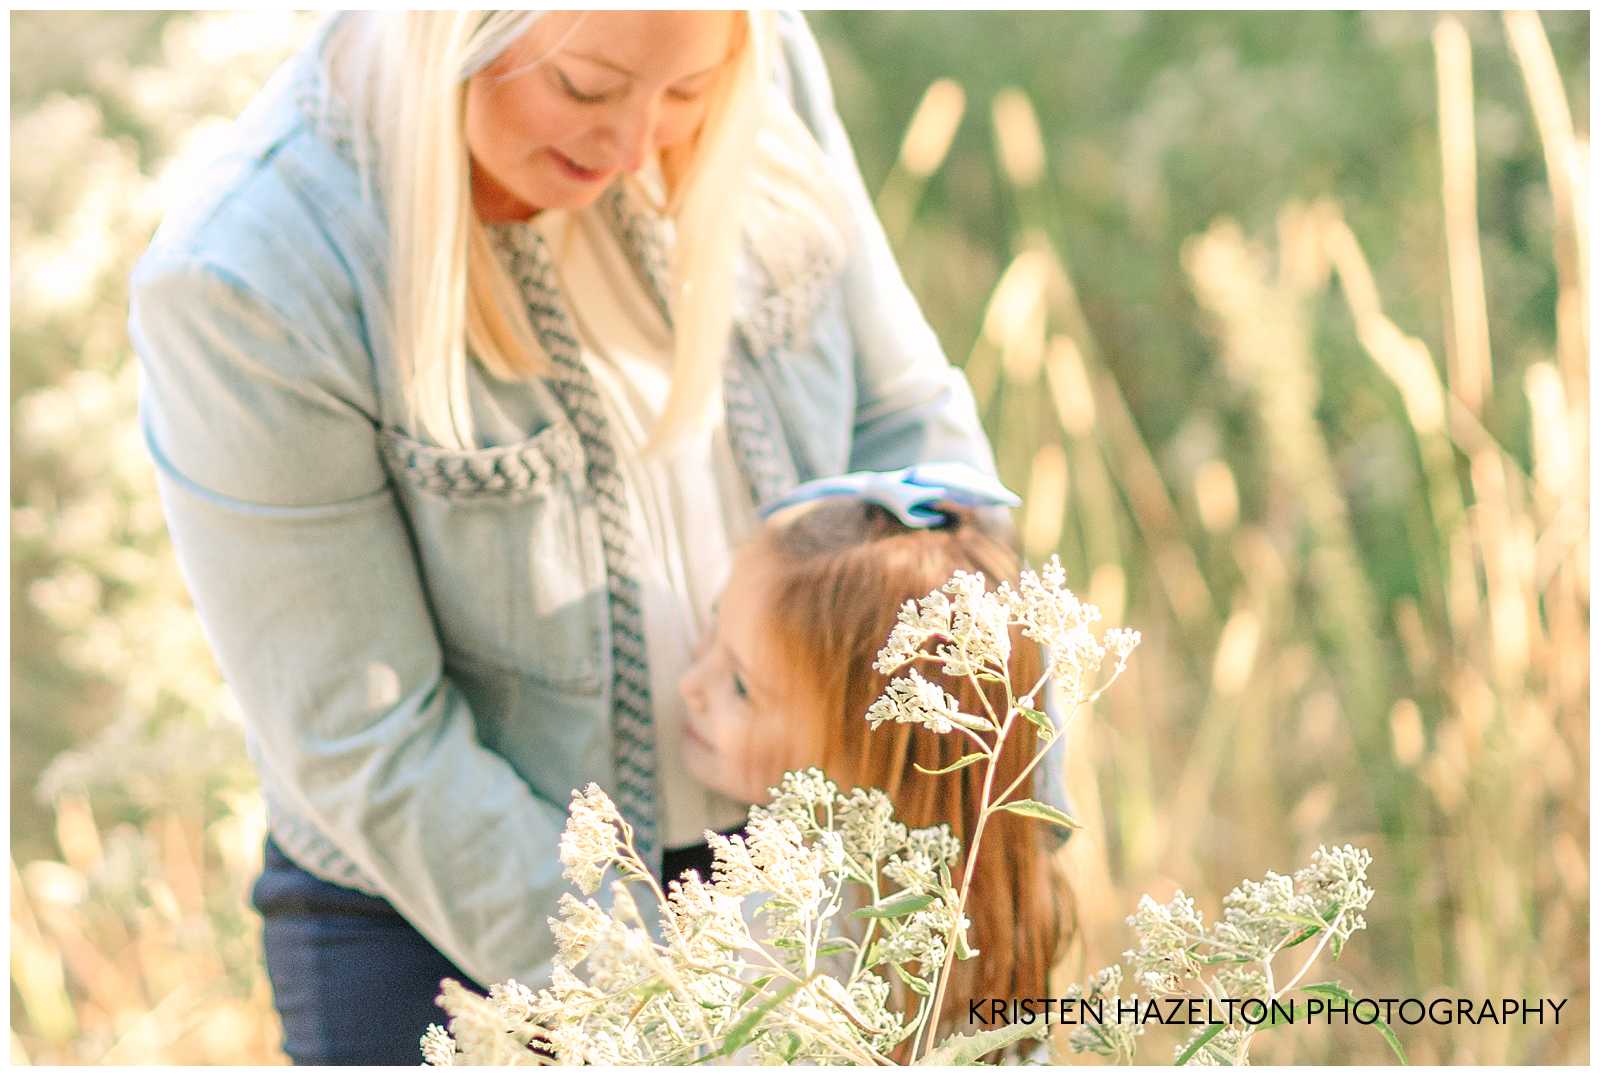 Out of focus shot of a mom looking down and hugging her young daughter in a field of flowers